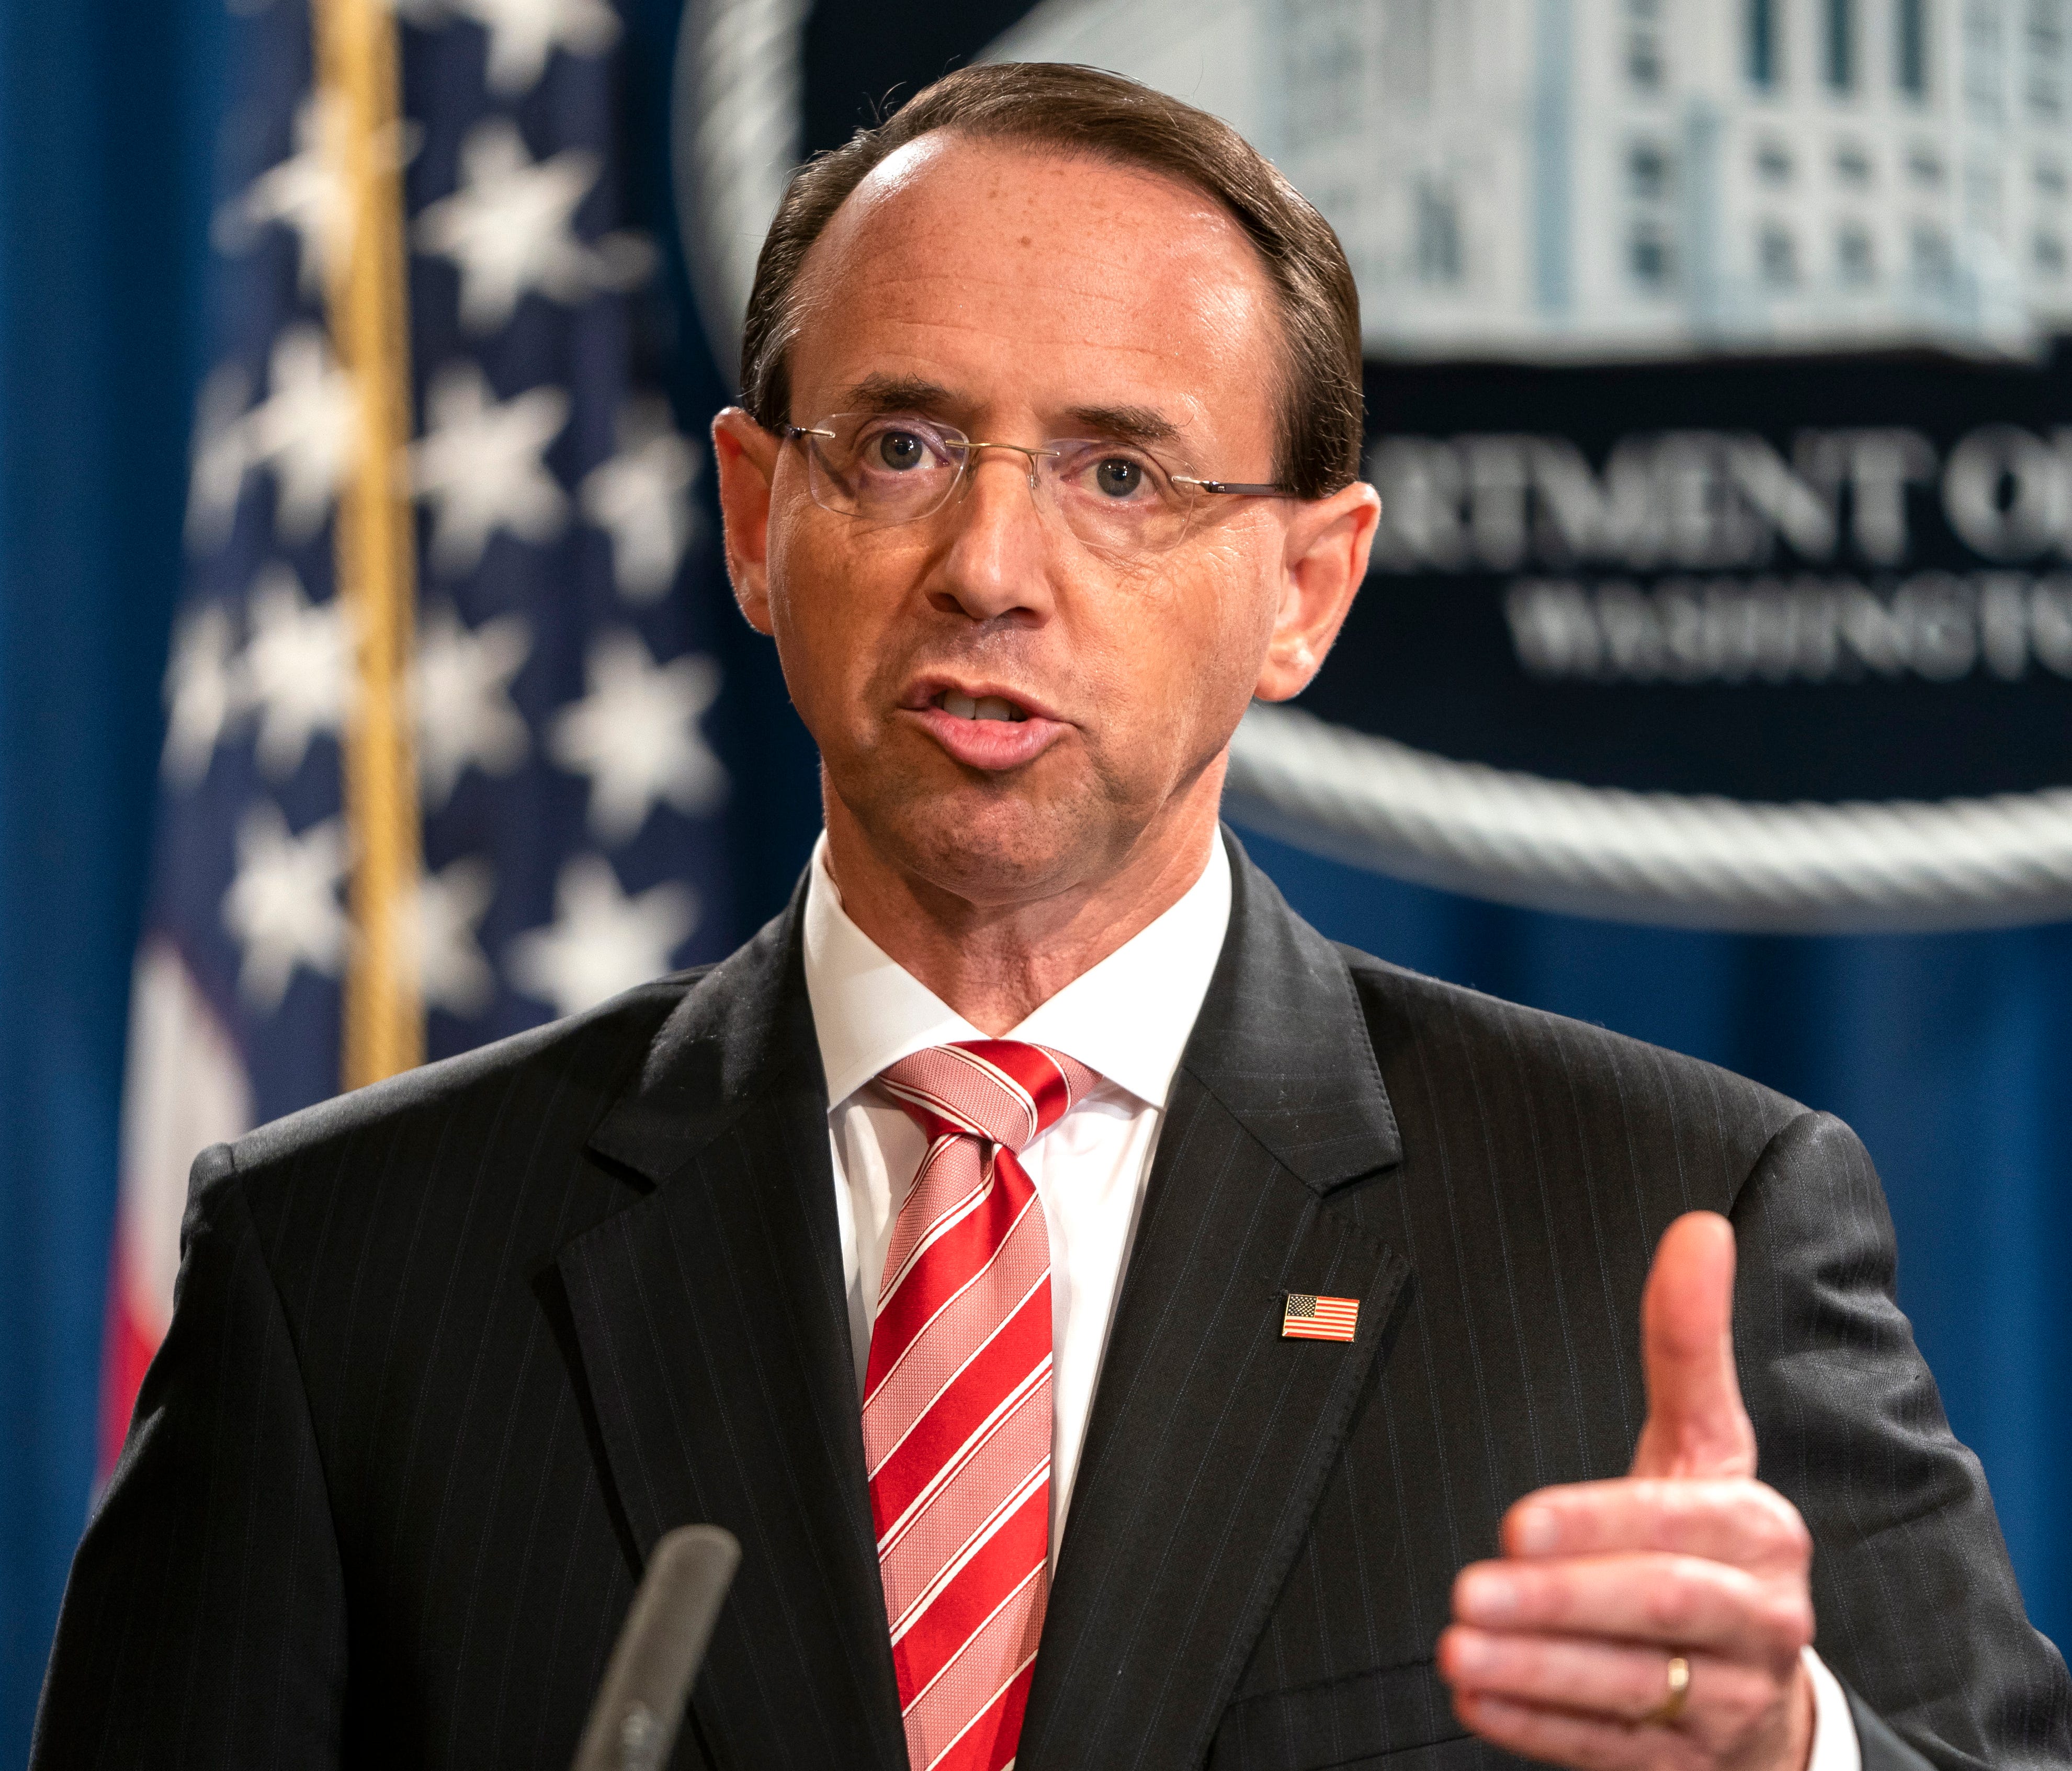 Deputy Attorney General Rod Rosenstein announces that the Justice Department is indicting 12 Russian military officers for hacking Democratic emails during the 2016 presidential election.